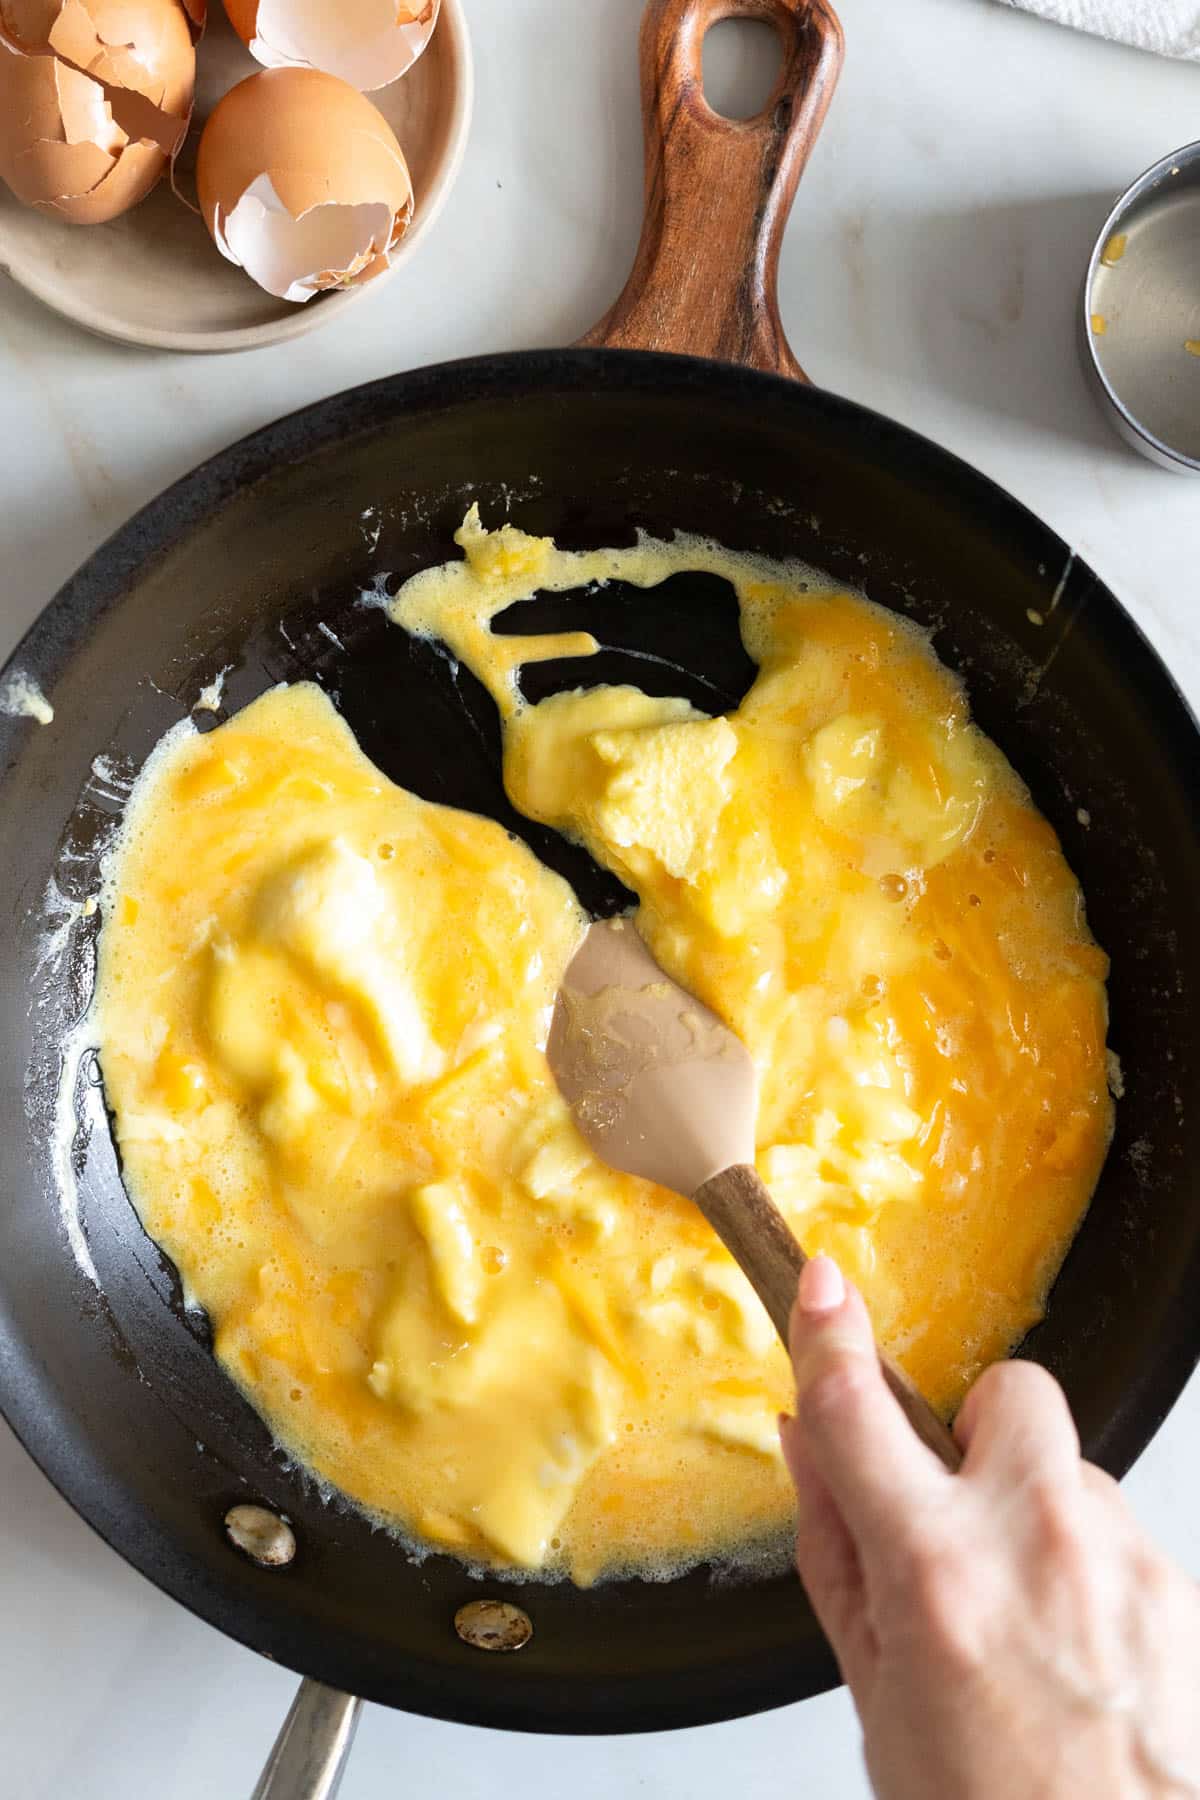 Creating soft egg curds with a spatula.